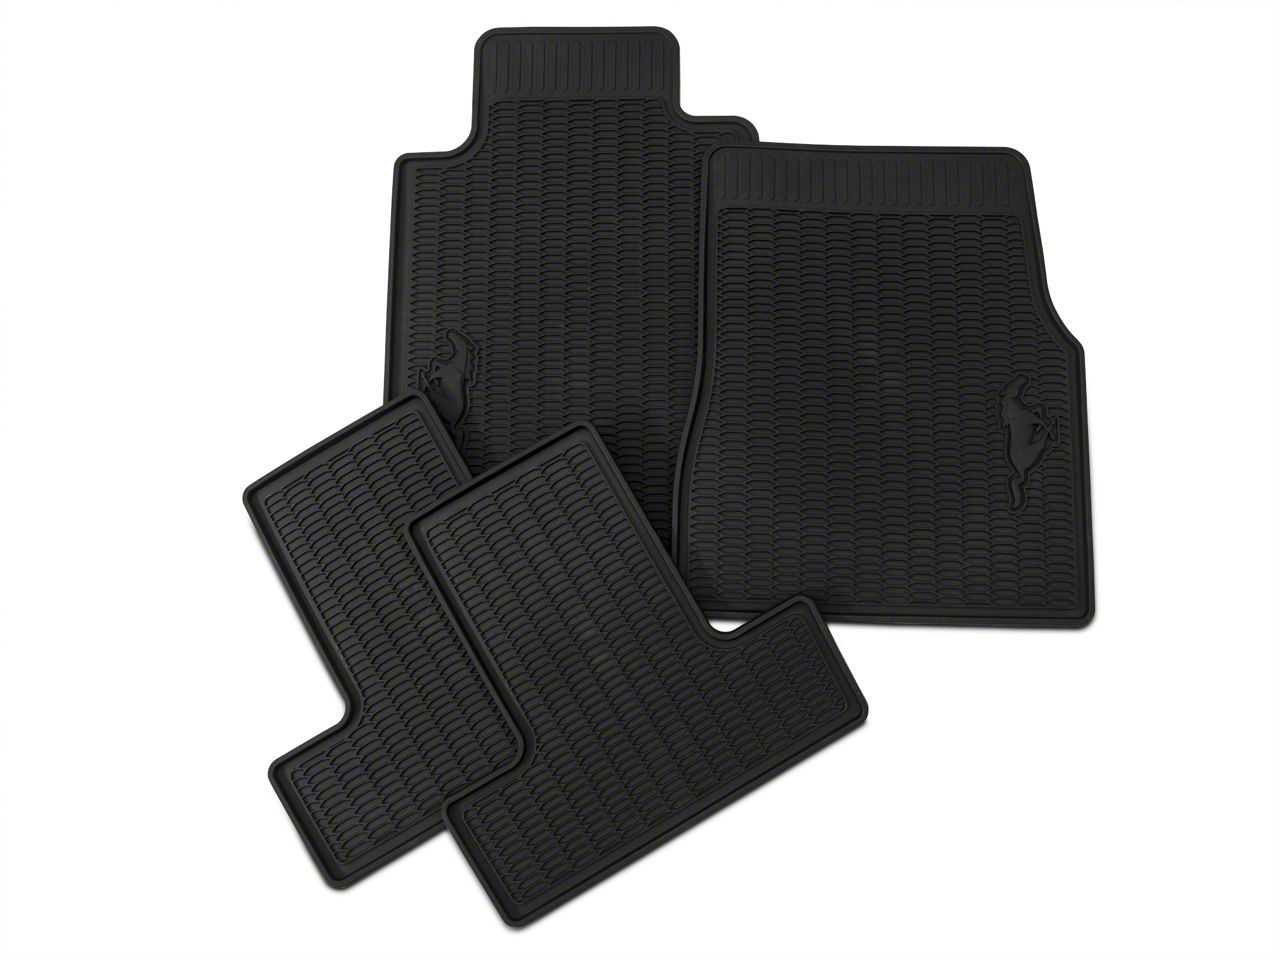  Car Floor Mats for Ford Mustang Coupe 1967-1973 Full Coverage  All Weather Protection Leather Auto Floor Liner Carpet Set Accessories  Black Yellow : Automotive